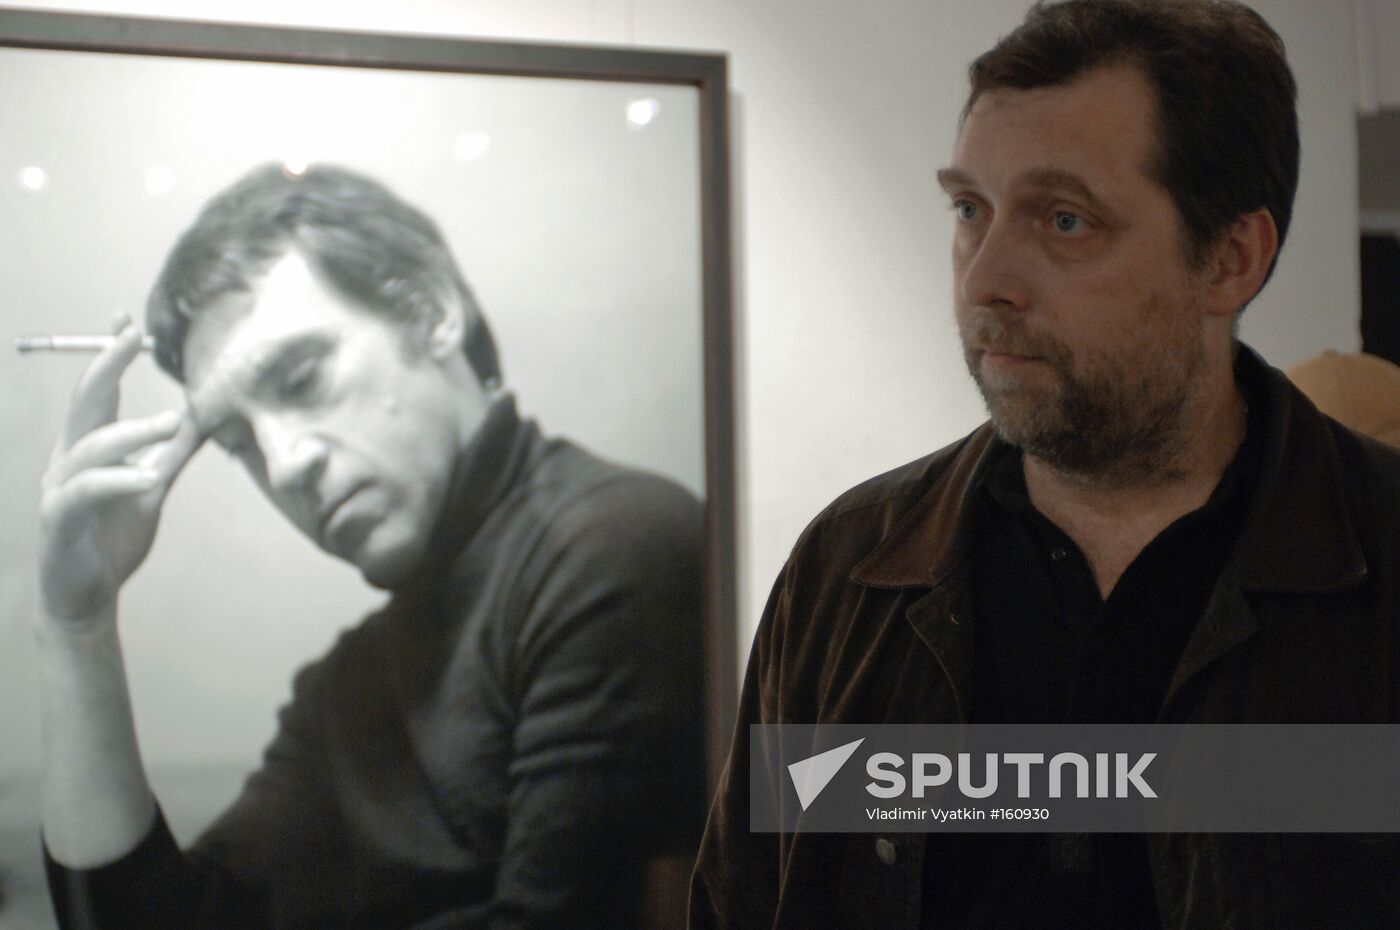 PHOTO EXHIBITION "VLADIMIR VYSOTSKY IN THE BAUMAN TECHNOLOGICAL 